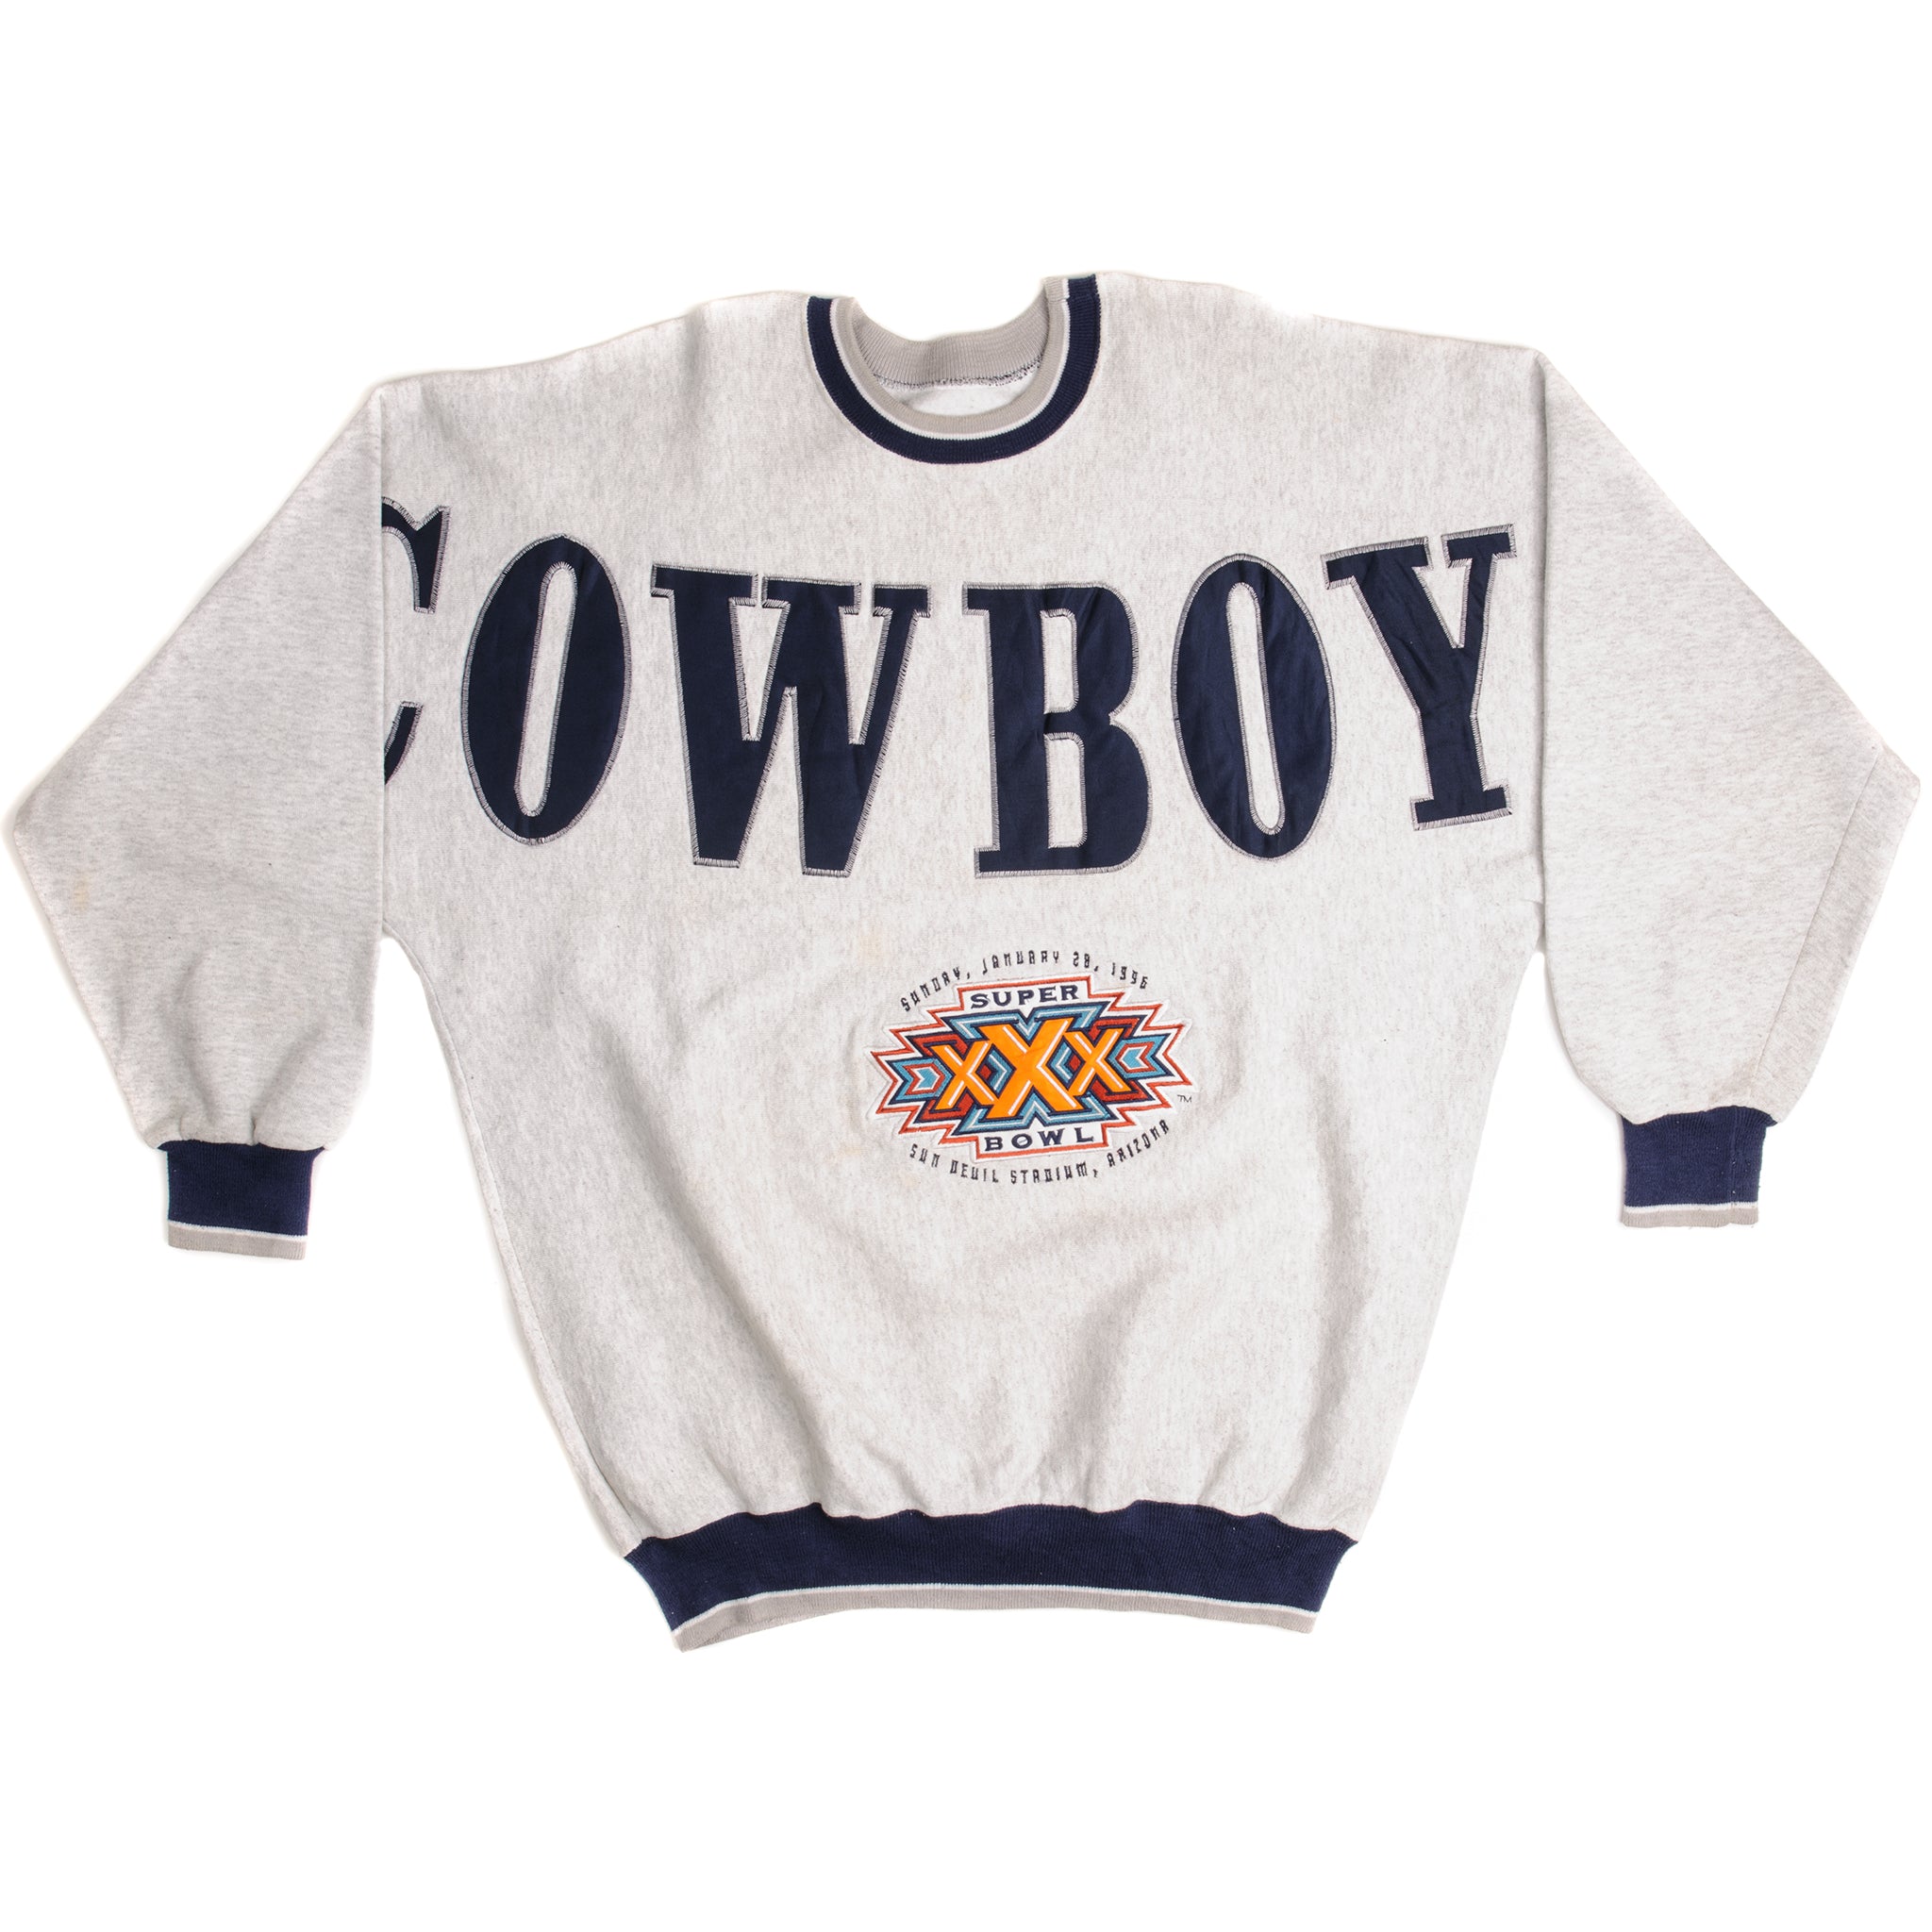 UsaVintageBarcelona Size L. Made in USA 90s Dallas Cowboys NFL Vintage Sweatshirt Made by Russell